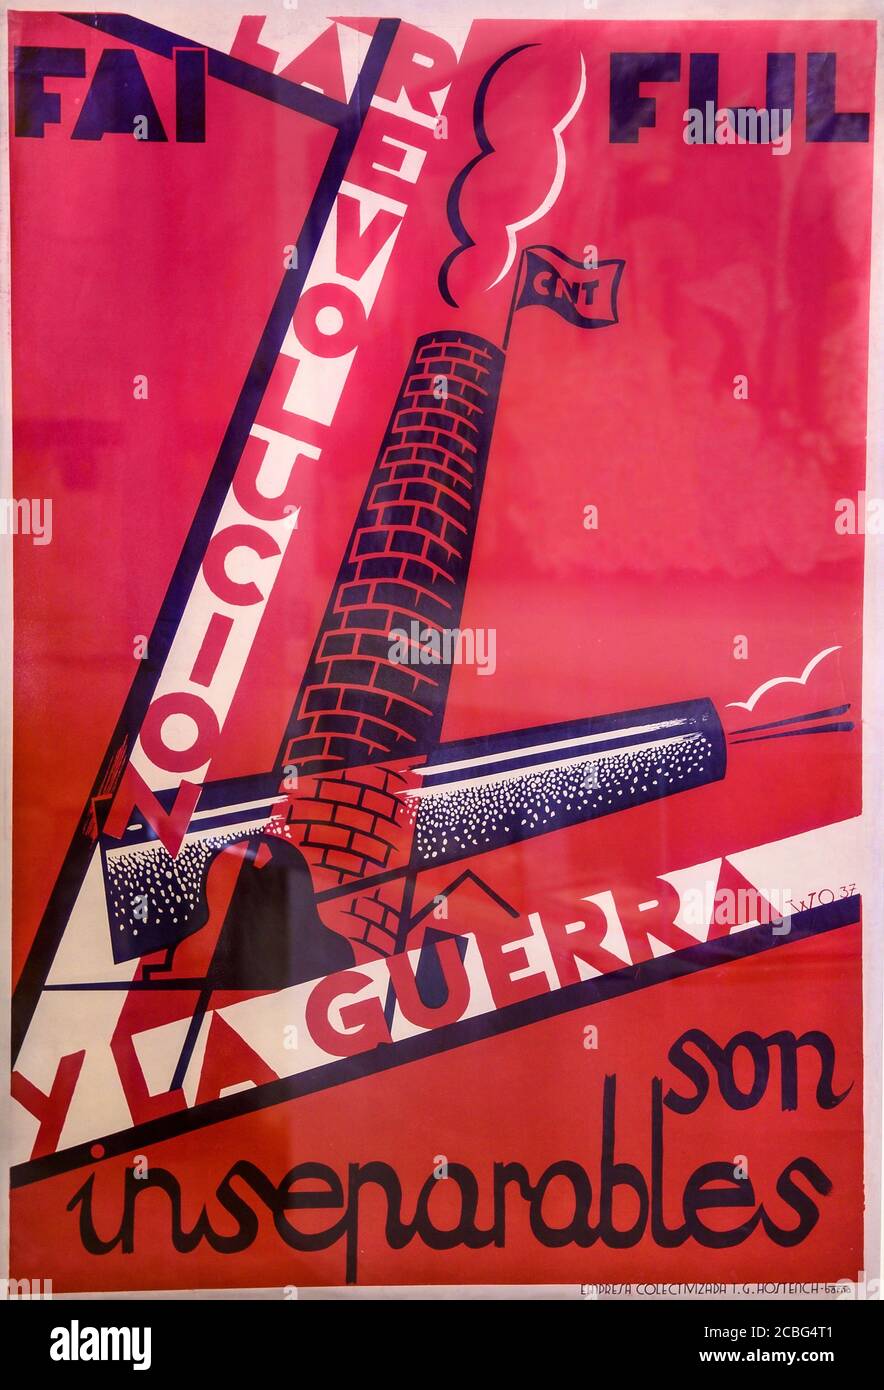 Spanish civil war poster from the 1930's produced by the FAI, CNT, the Spanish anarchist party. 'Revolution and war are inseparable' Stock Photo